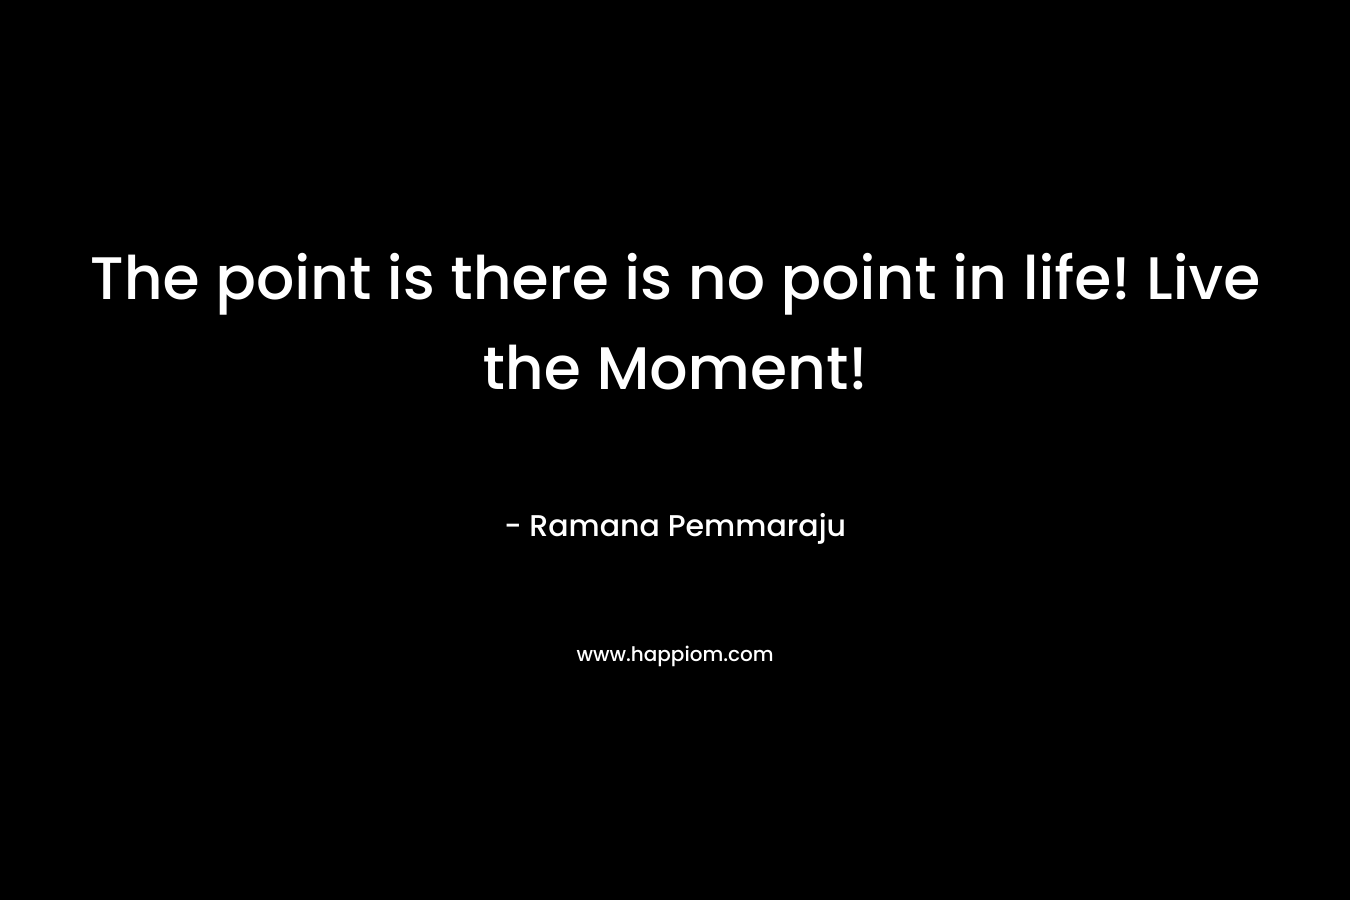 The point is there is no point in life! Live the Moment!